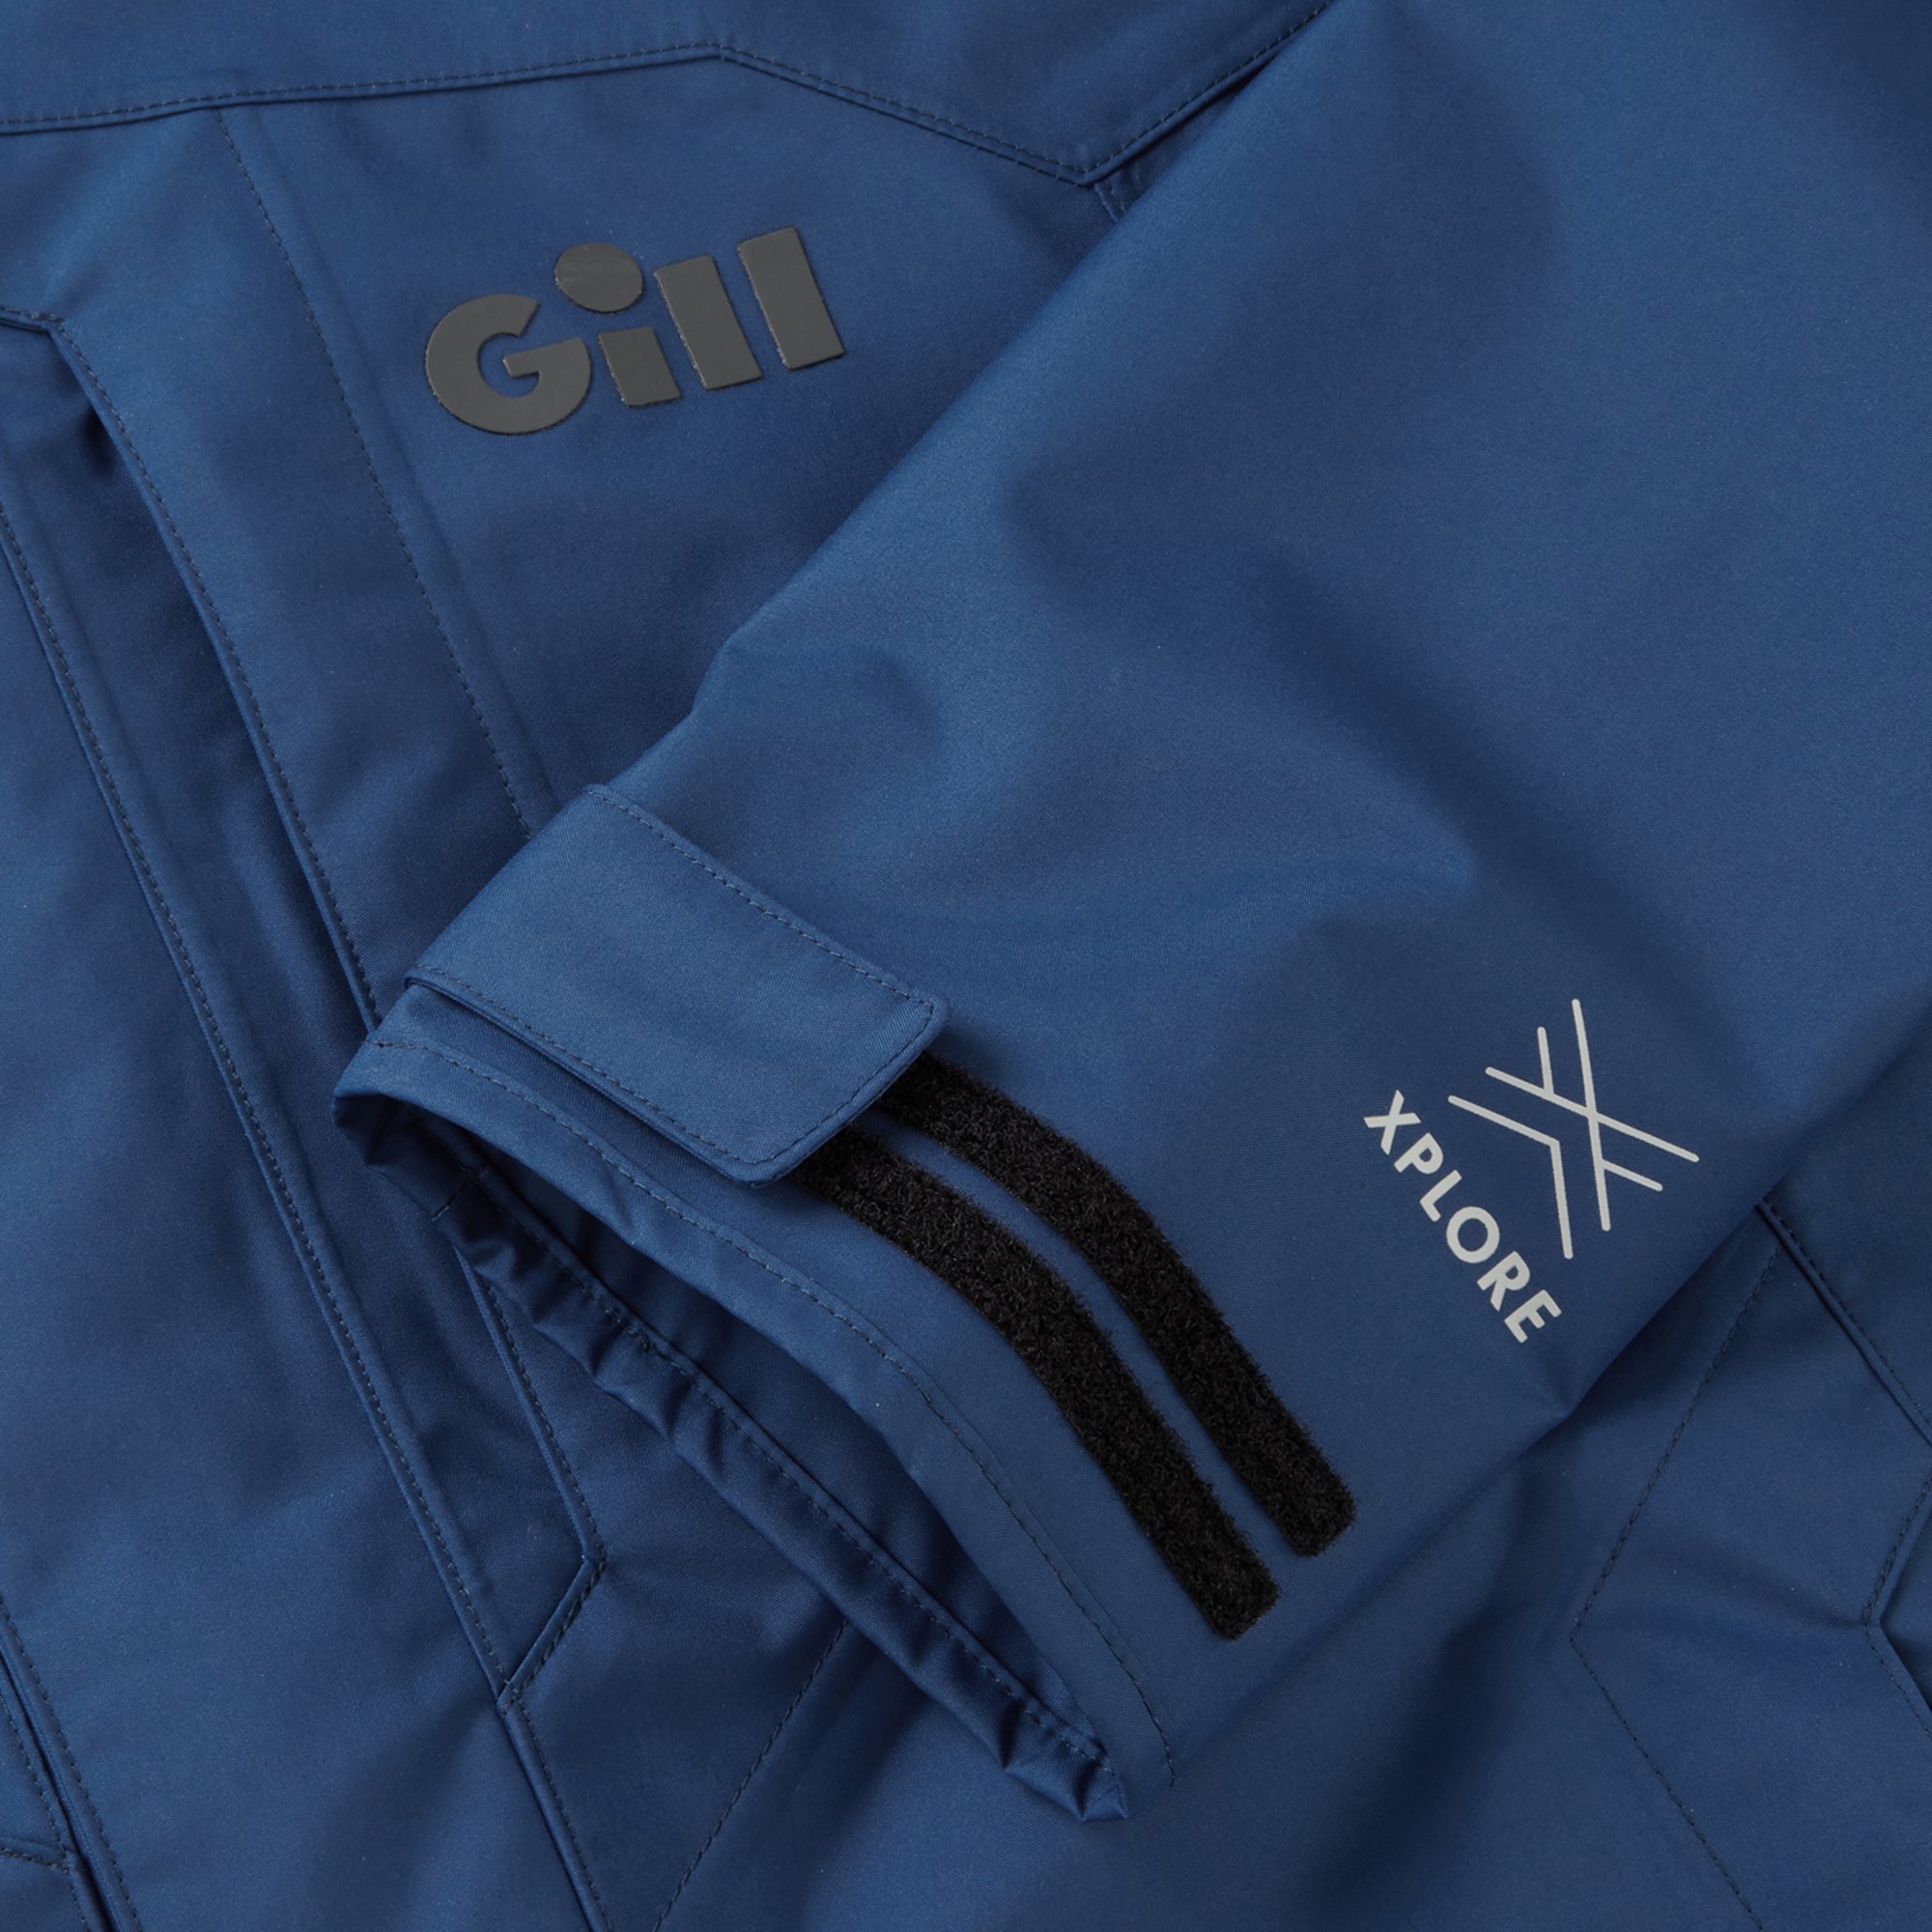 FG301J Aspect Jacket: Gill Apparel Fishing - Fishing US Technical Official Store